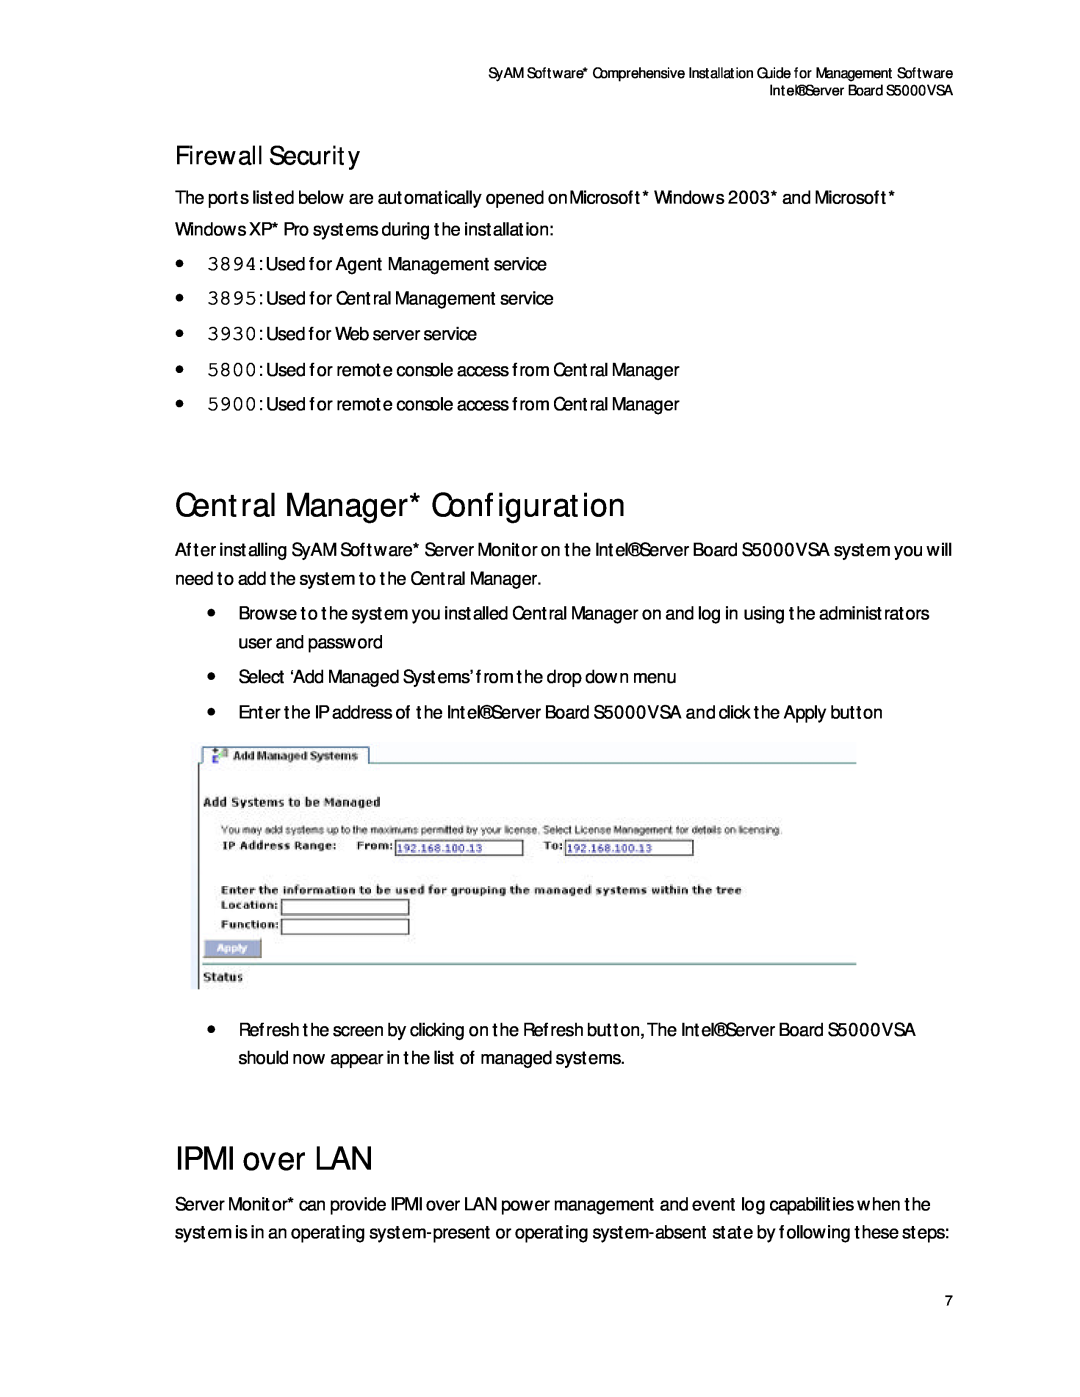 Intel S5000VSA manual Central Manager* Configuration, IPMI over LAN, Firewall Security 